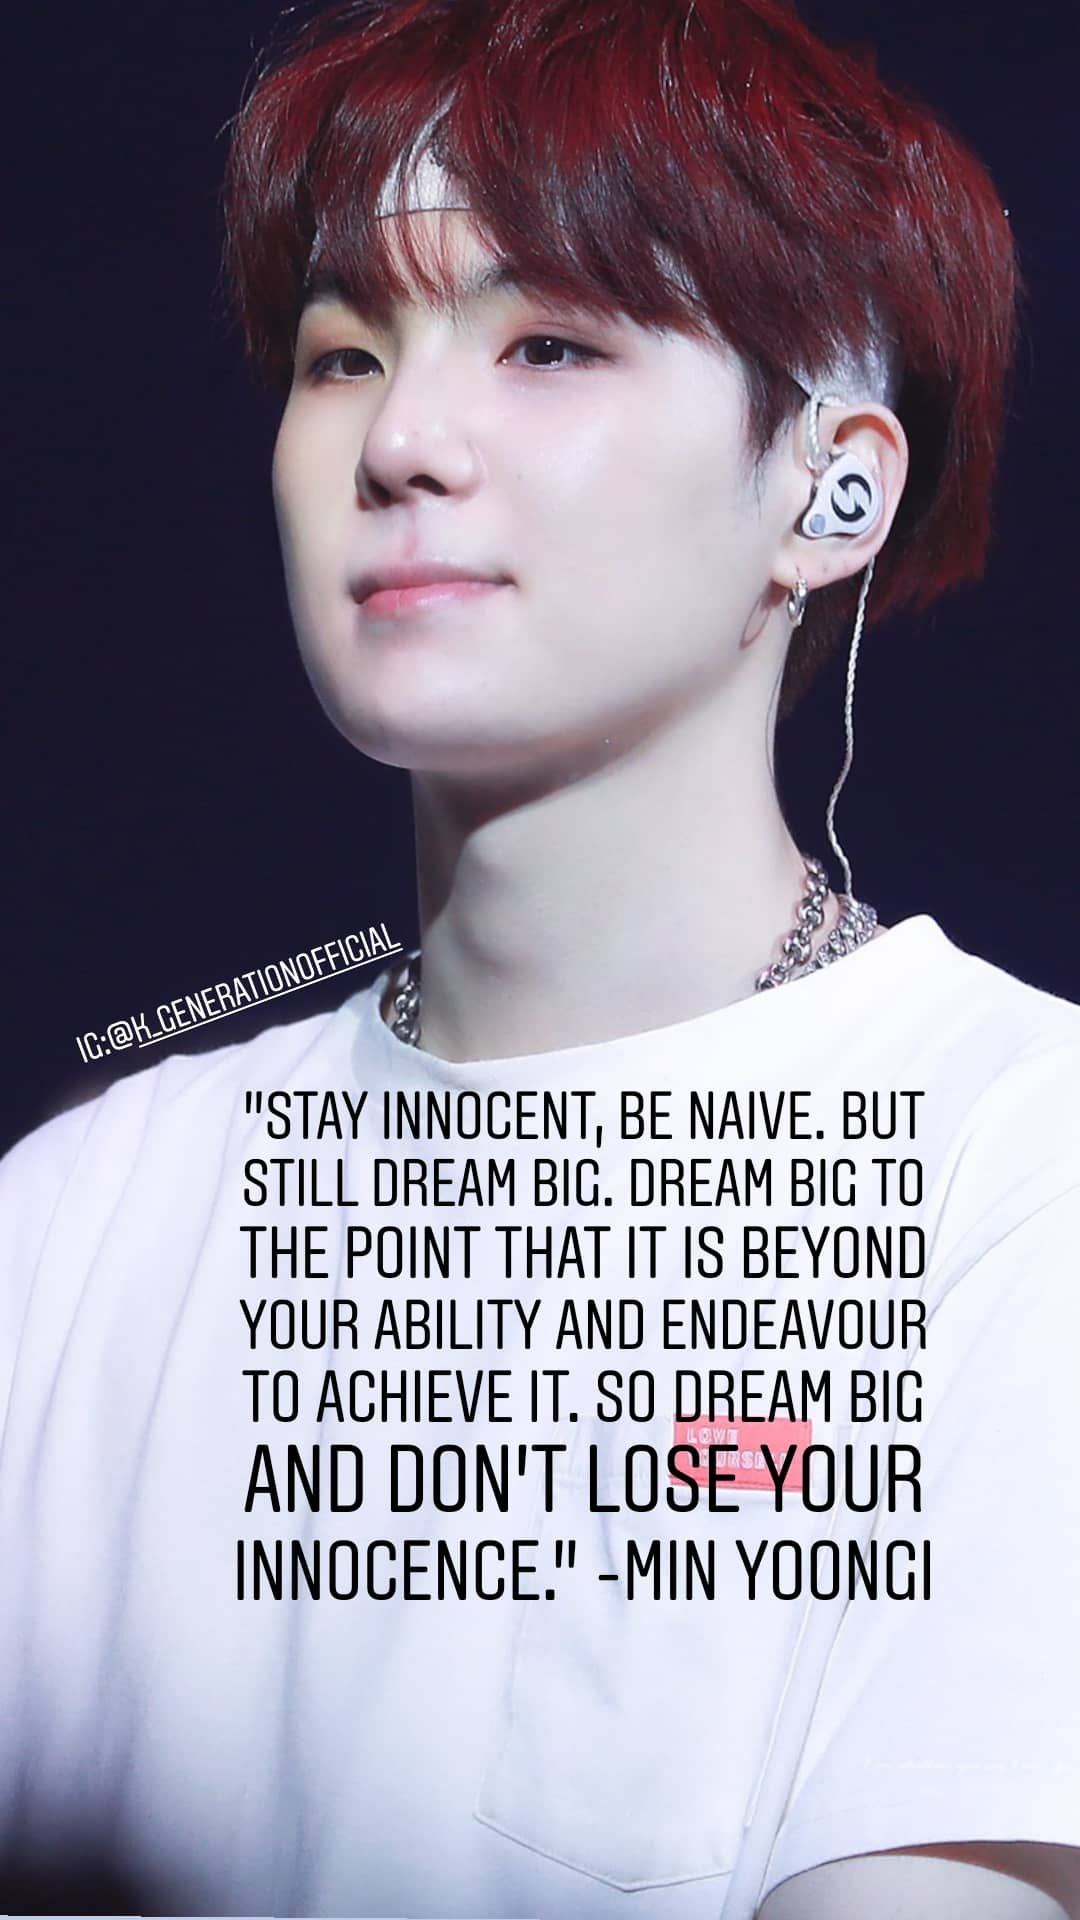 Min Yoongi Quotes Wallpapers Wallpaper Cave